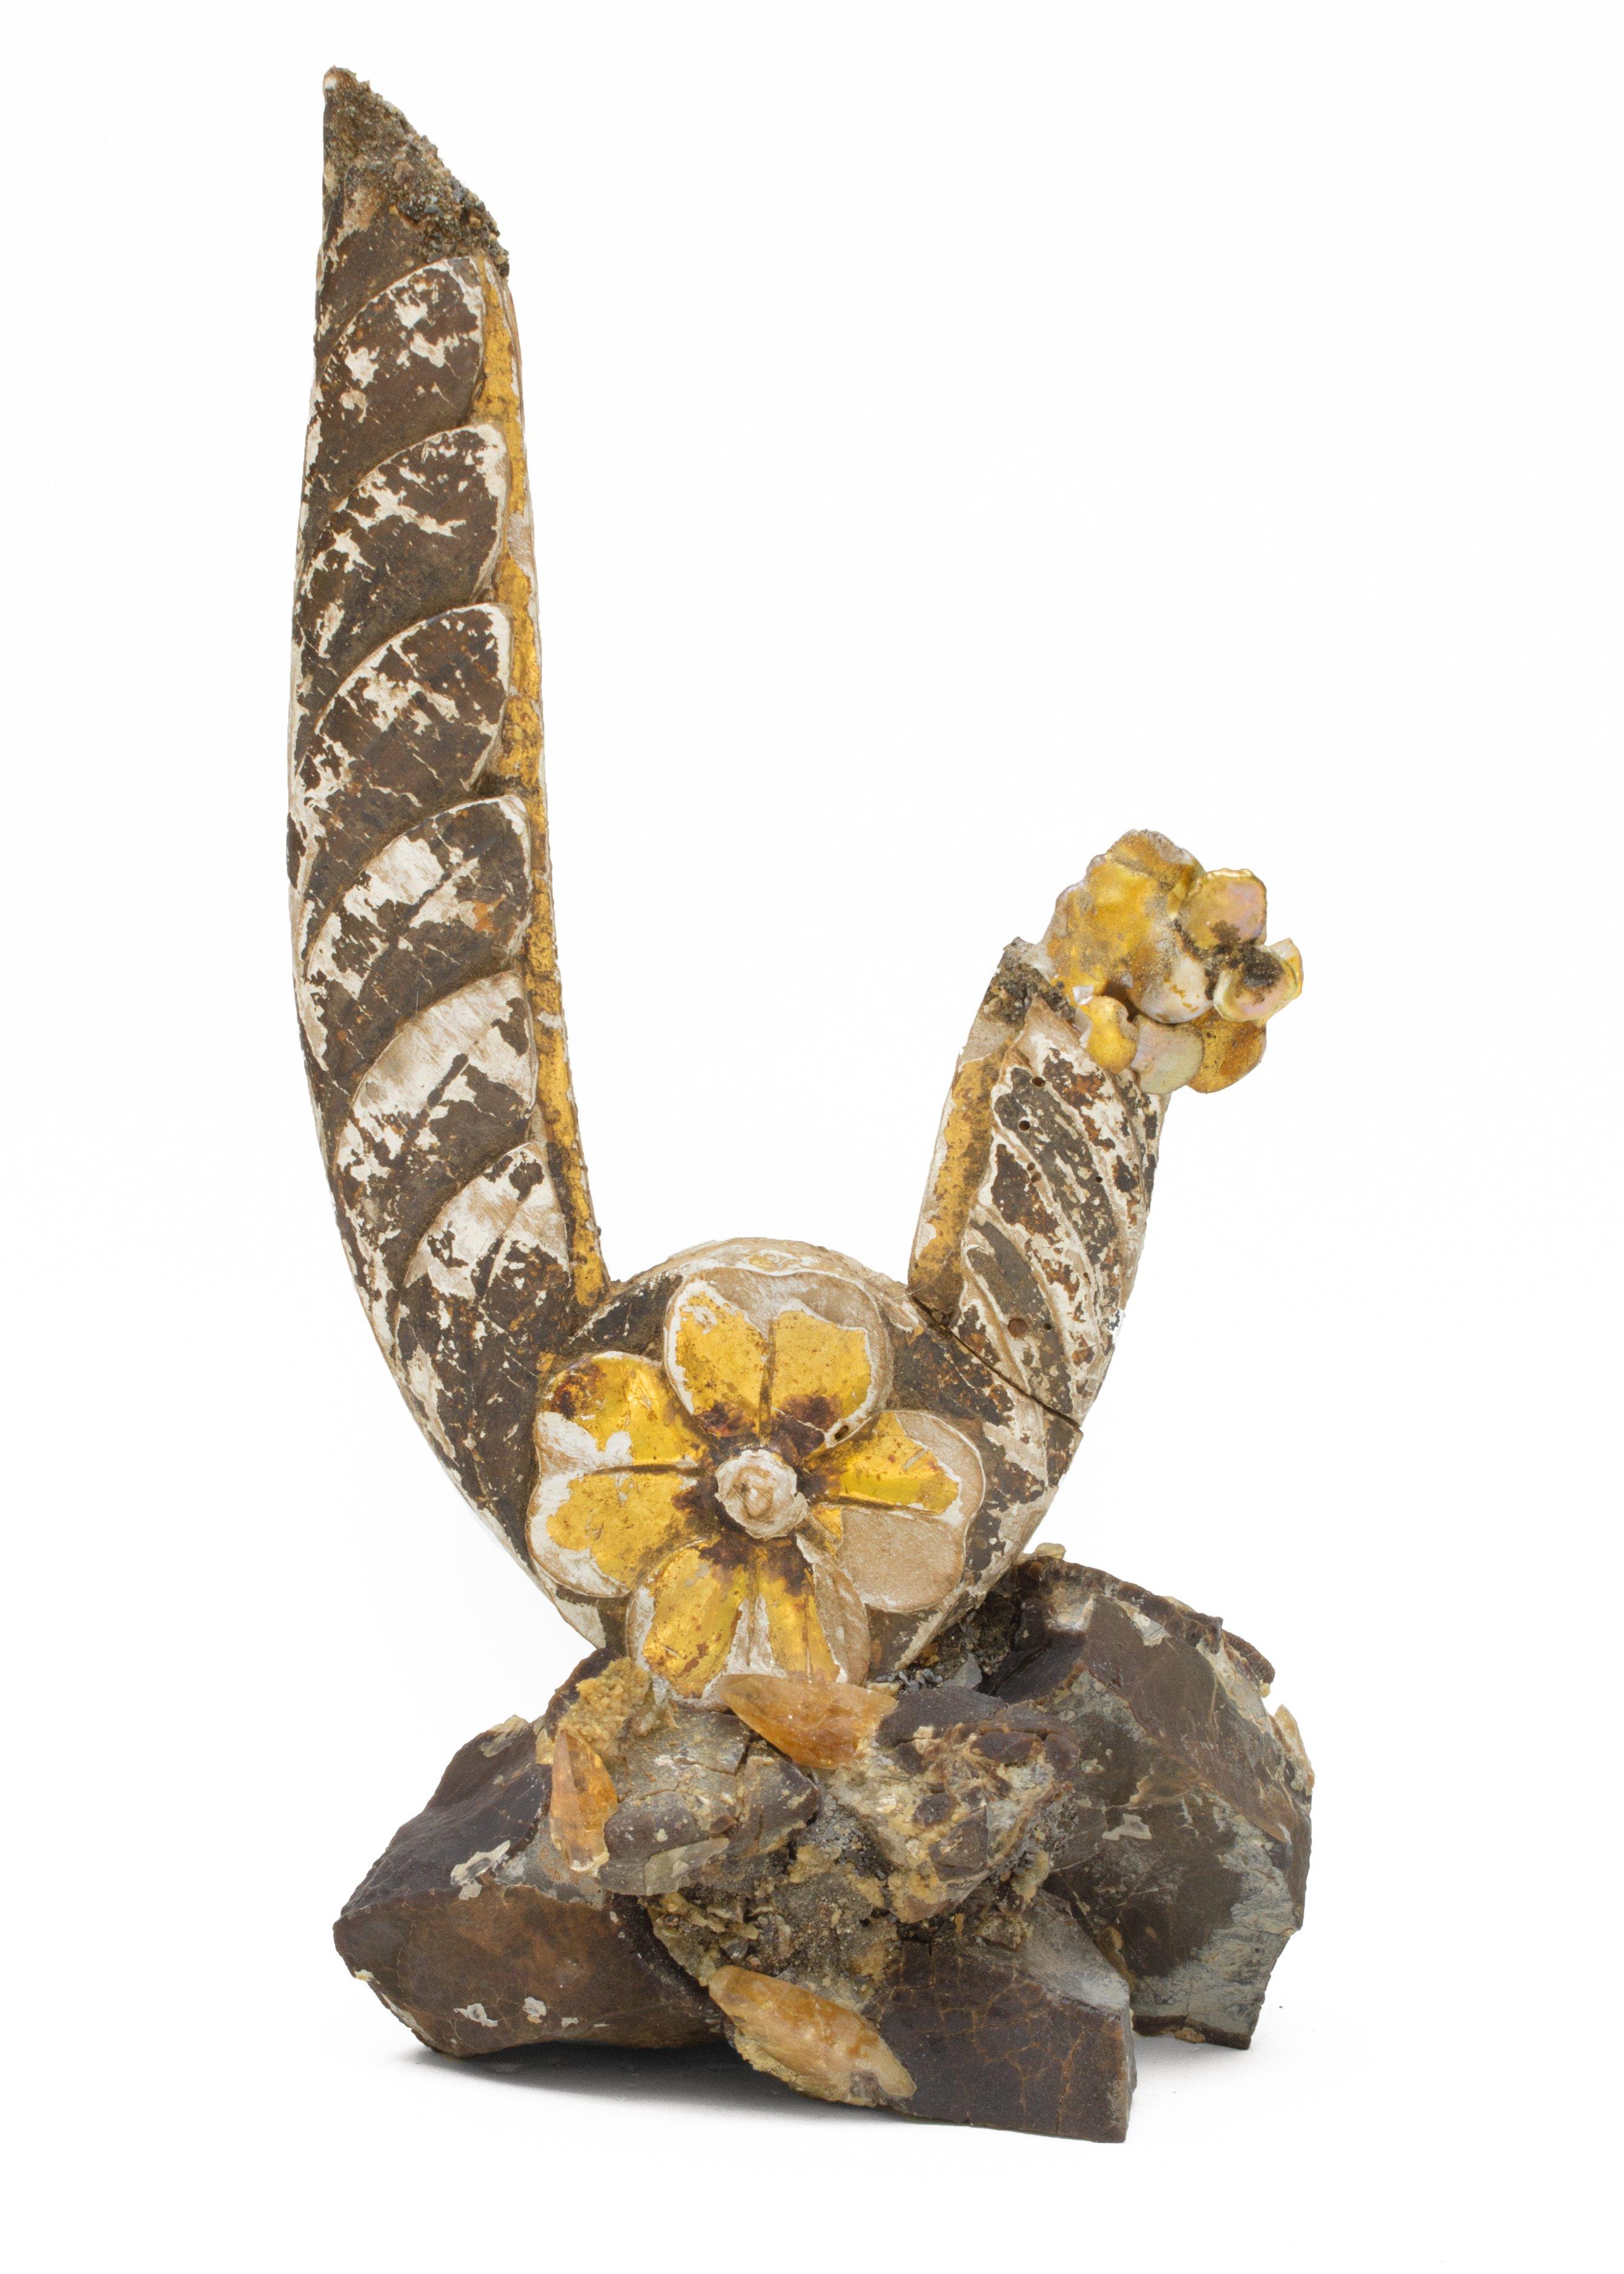 Rock Crystal Pair of 18th Century Italian Fragments with Gold Flower Reliefs & Golden Barite  For Sale